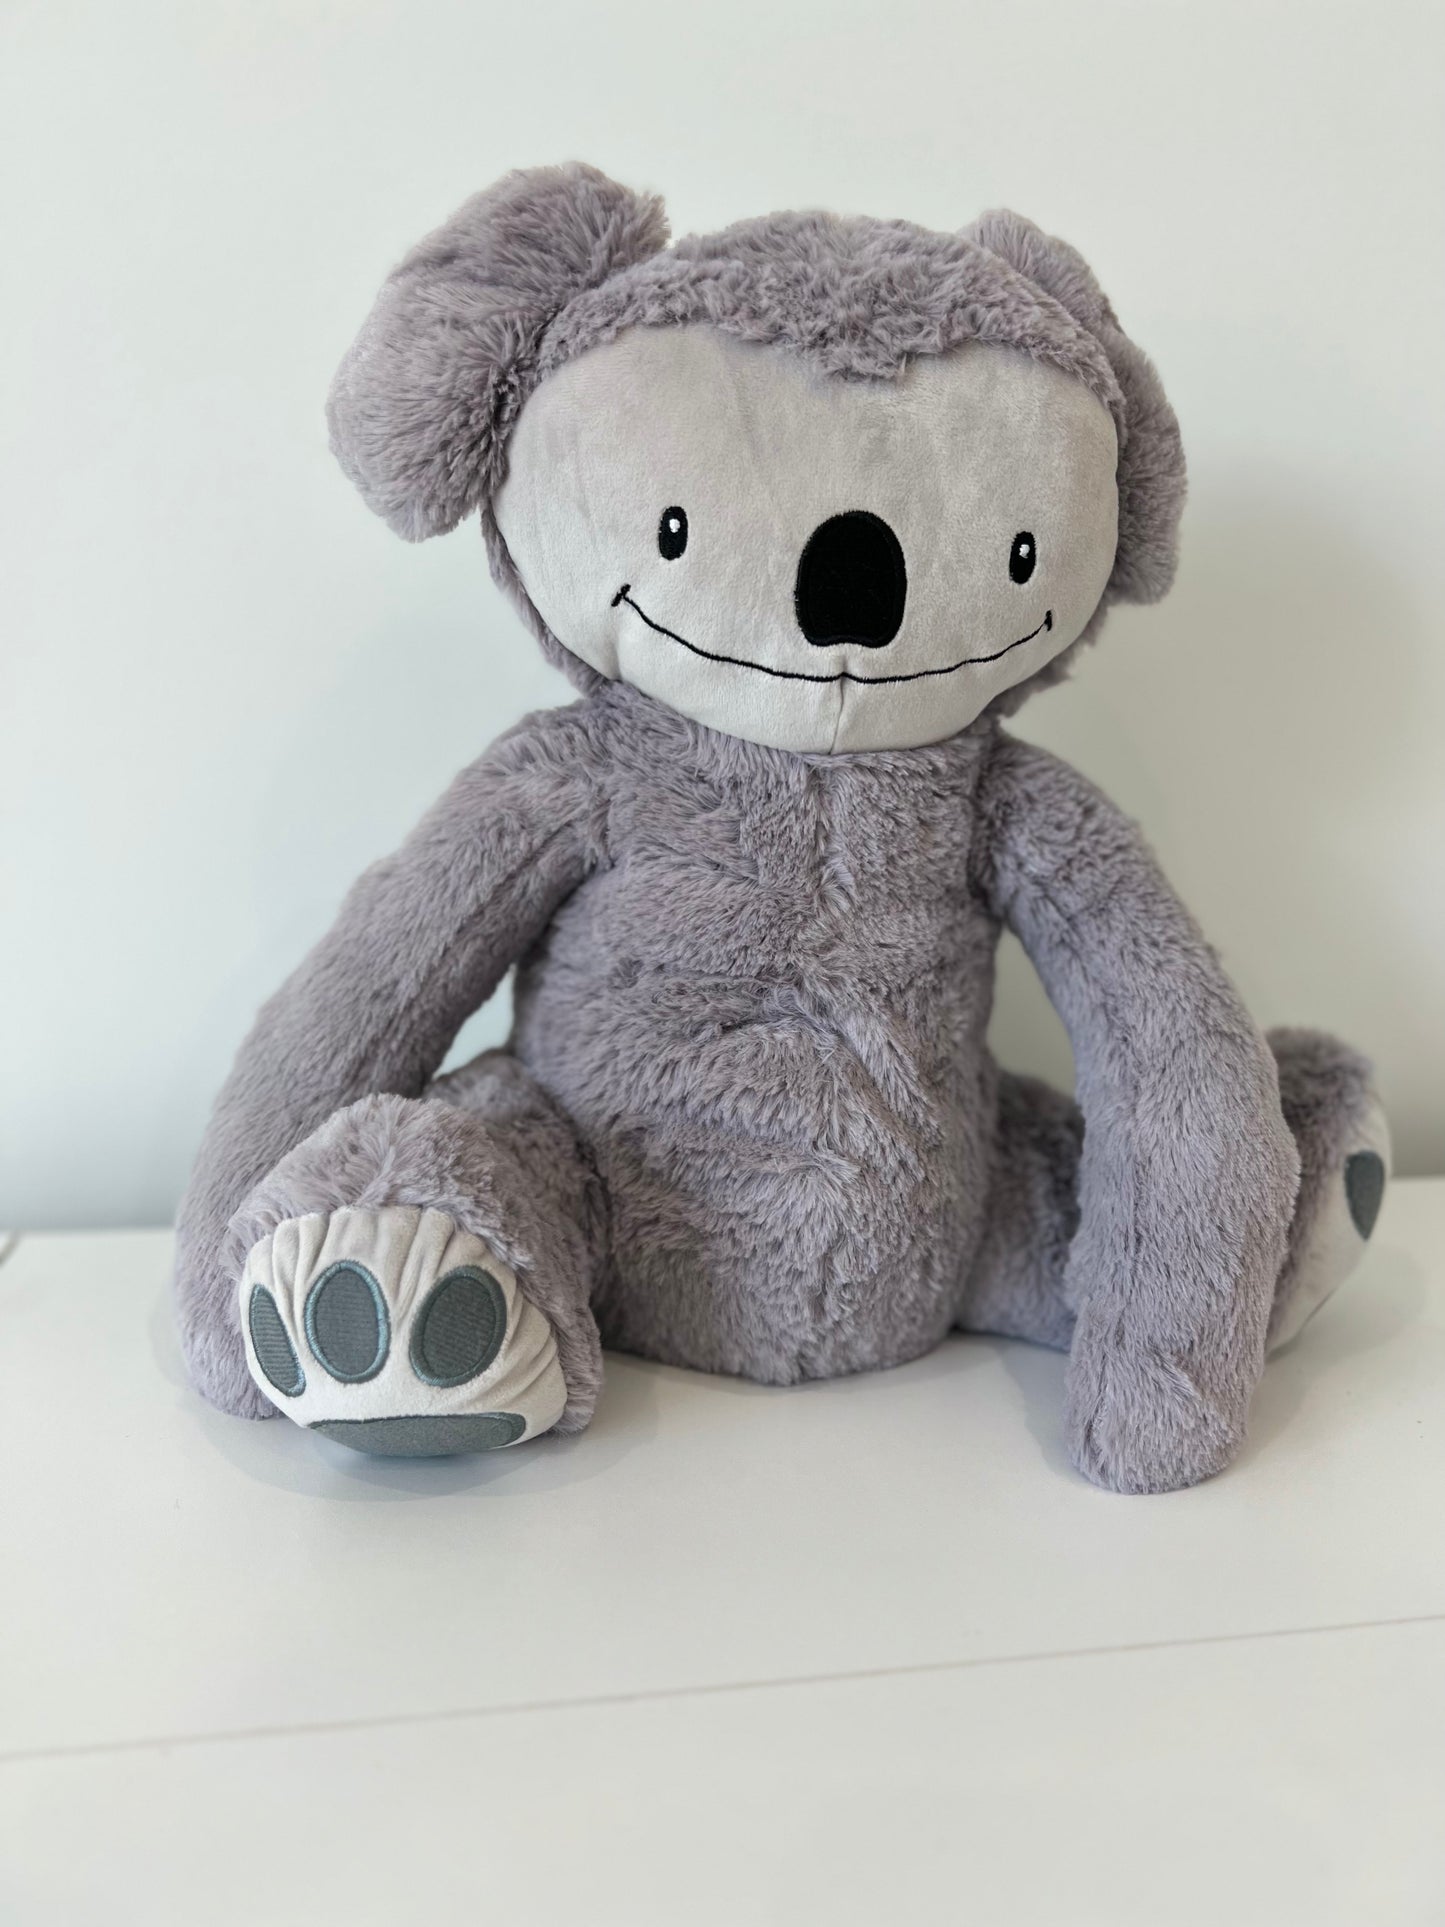 Weighted Plush Animals for people living with dementia - for Anxiety, Sensory Input or Companshionship - Calming Lap Animal